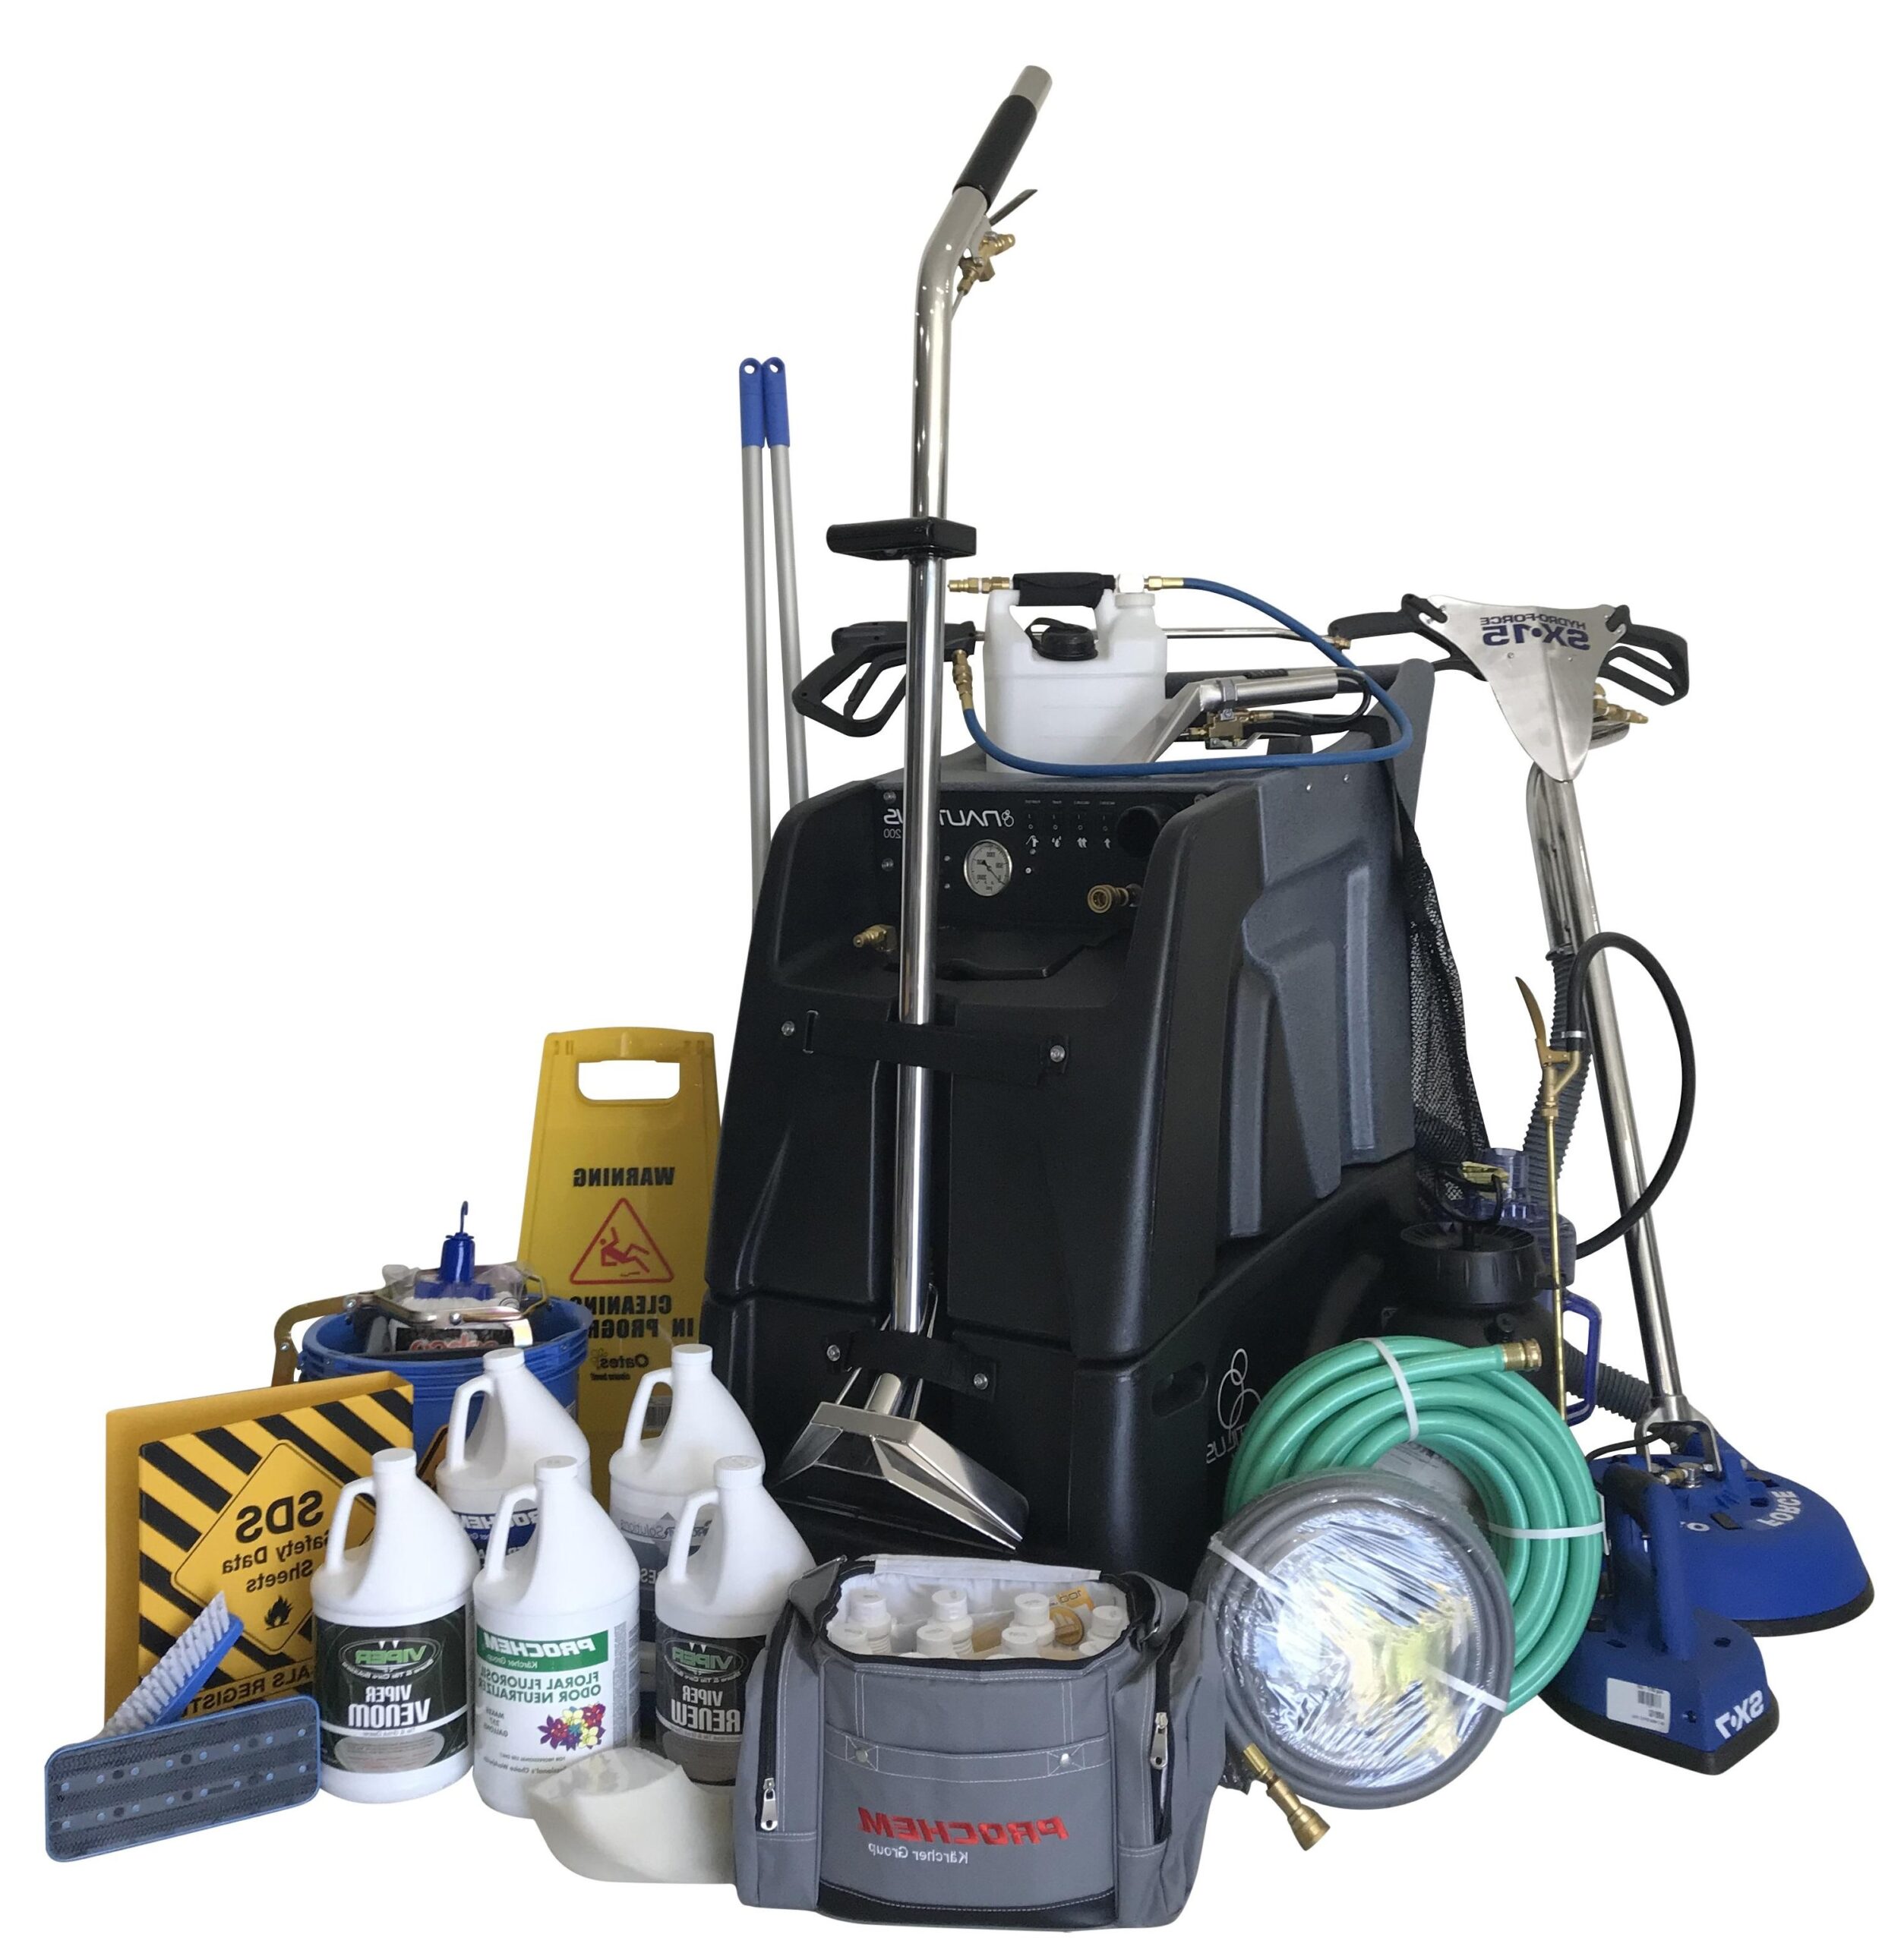 https://www.carpetcleaningforce.co.nz/wp-content/uploads/2022/02/Professional-Carpet-Cleaning-Equipment-scaled.jpg